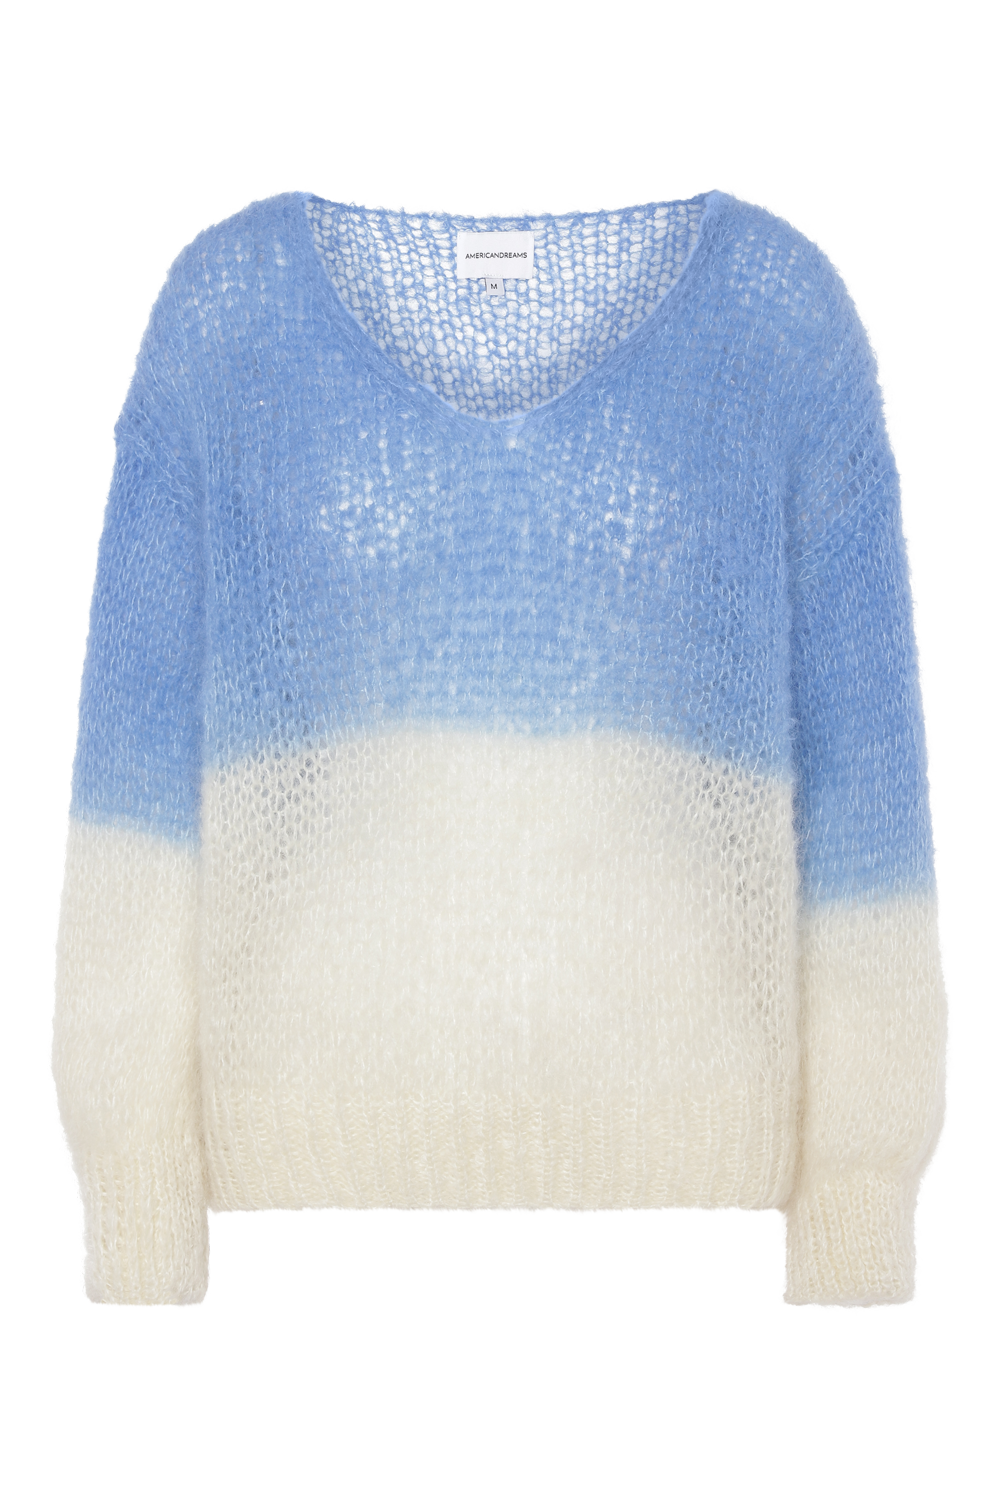 Milana Knit 2-Colored Sky Blue/White